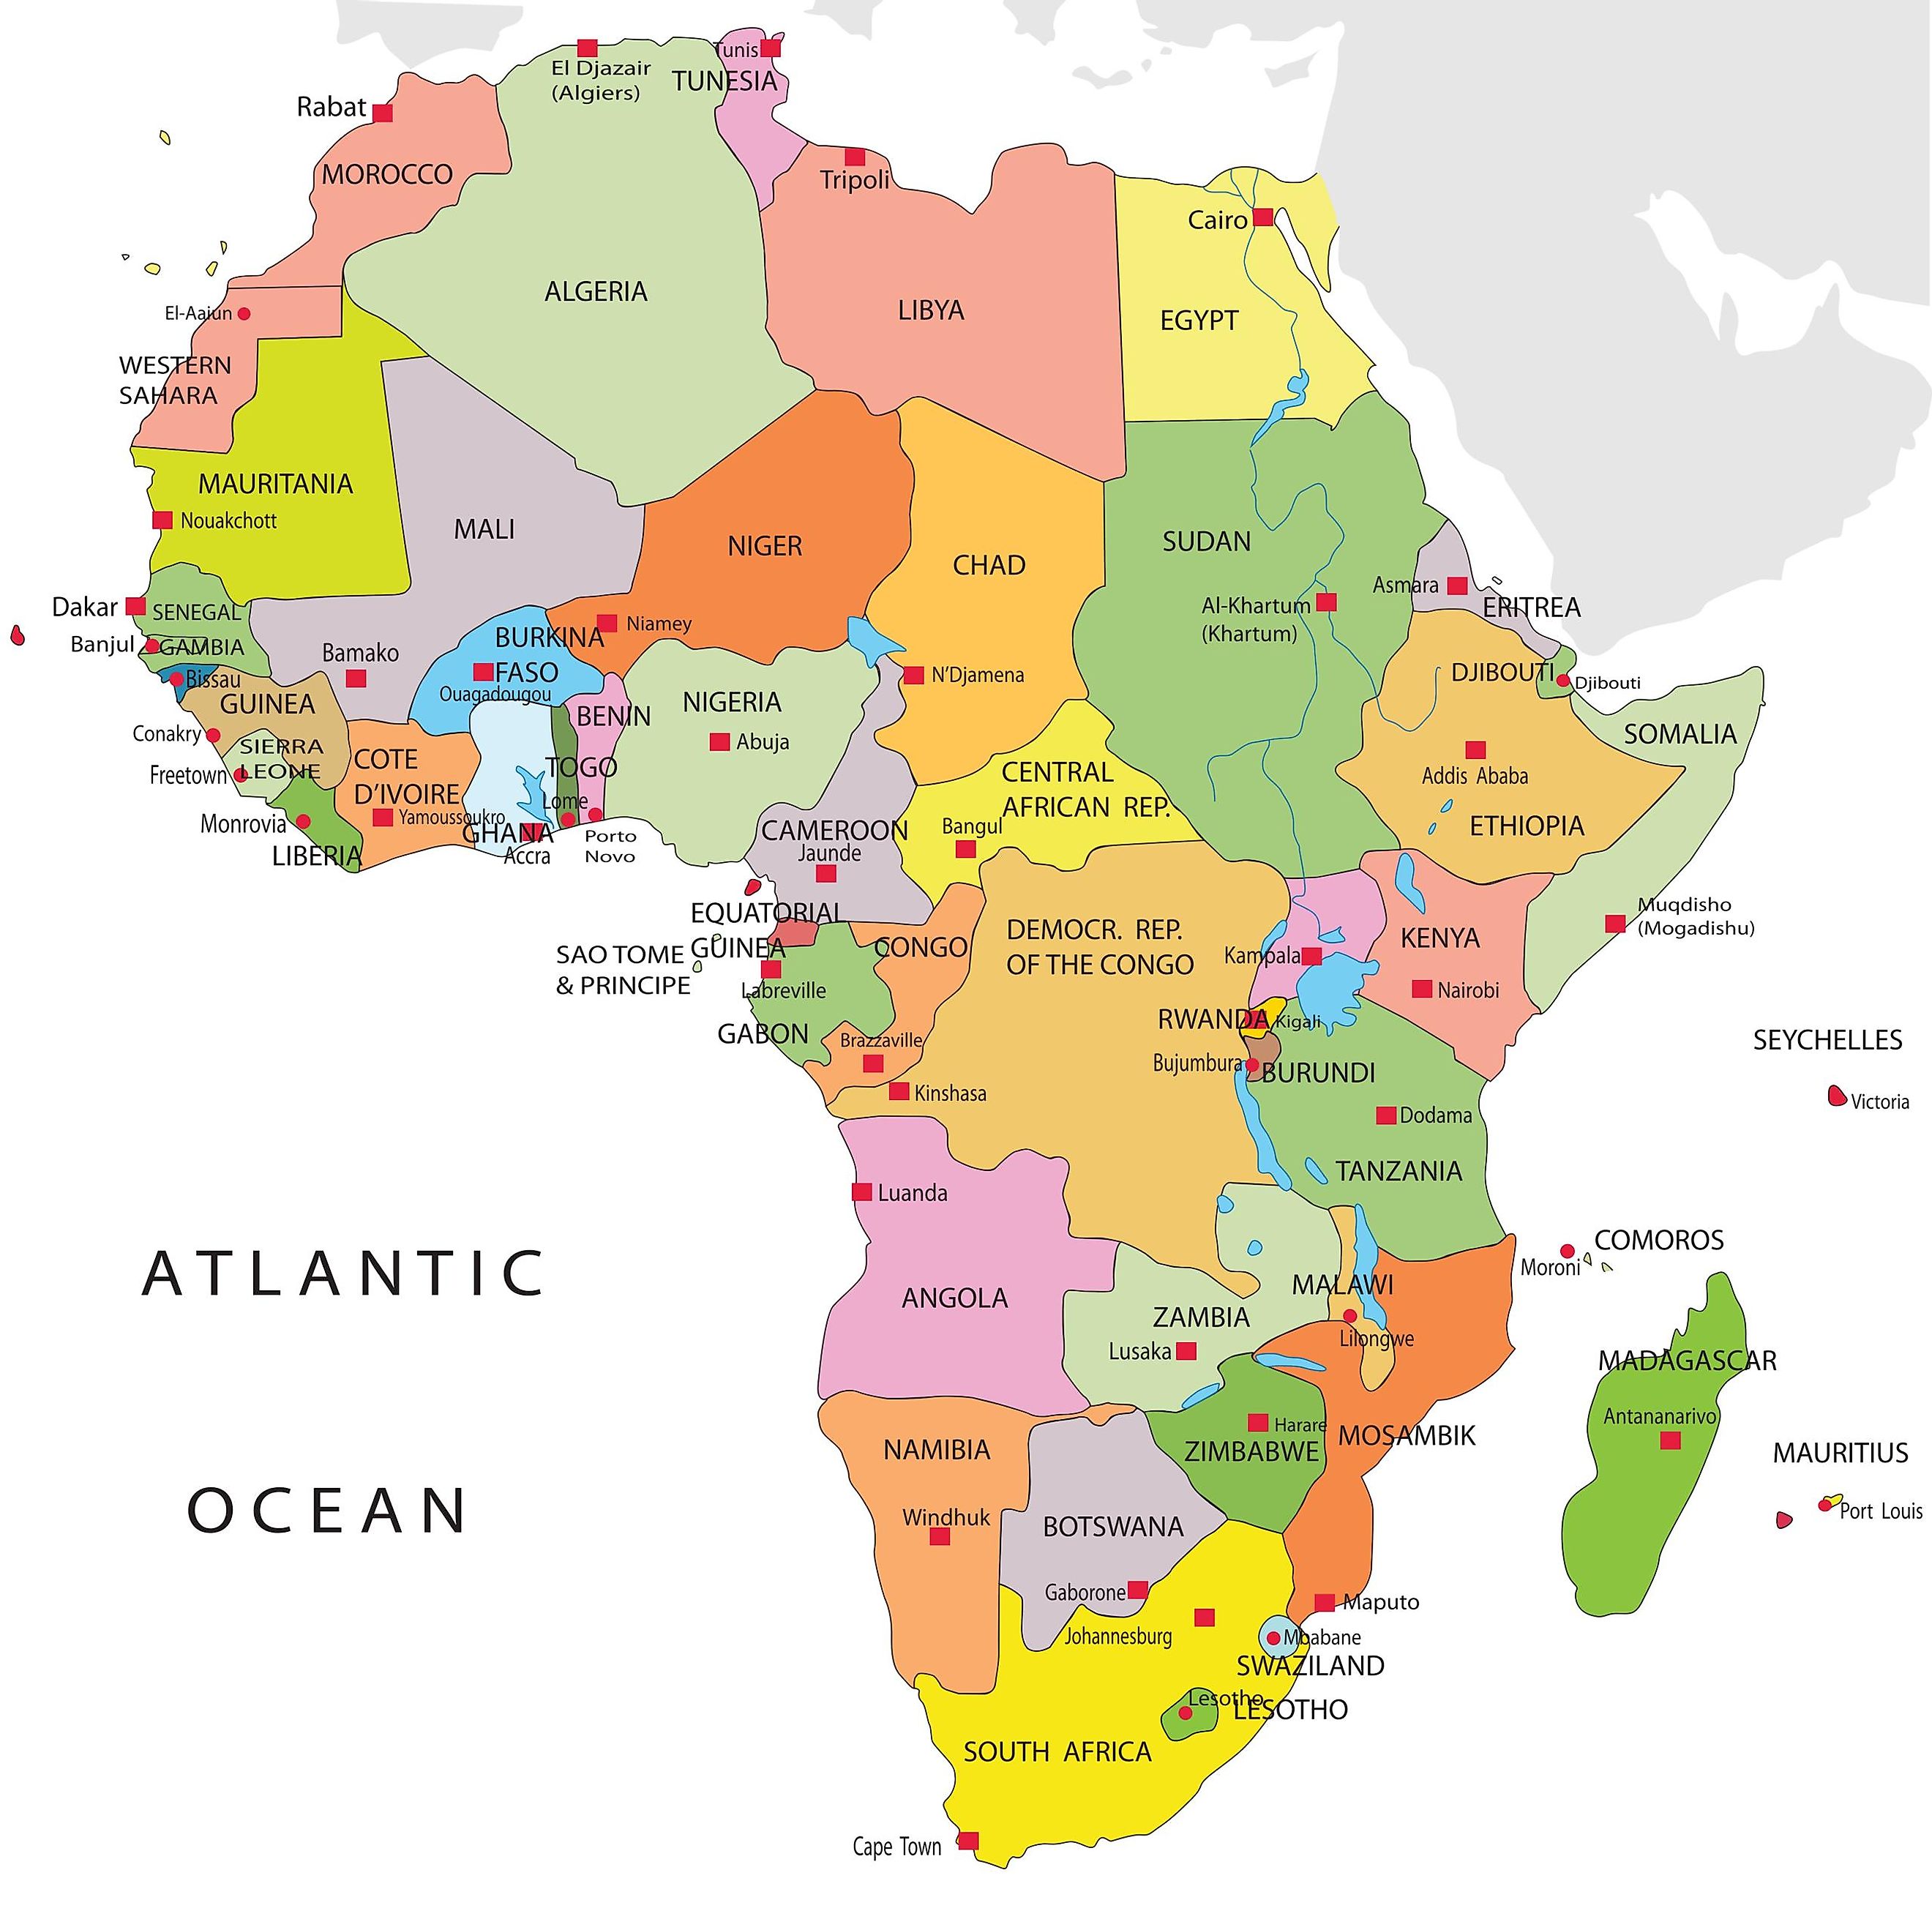 The map of Africa.